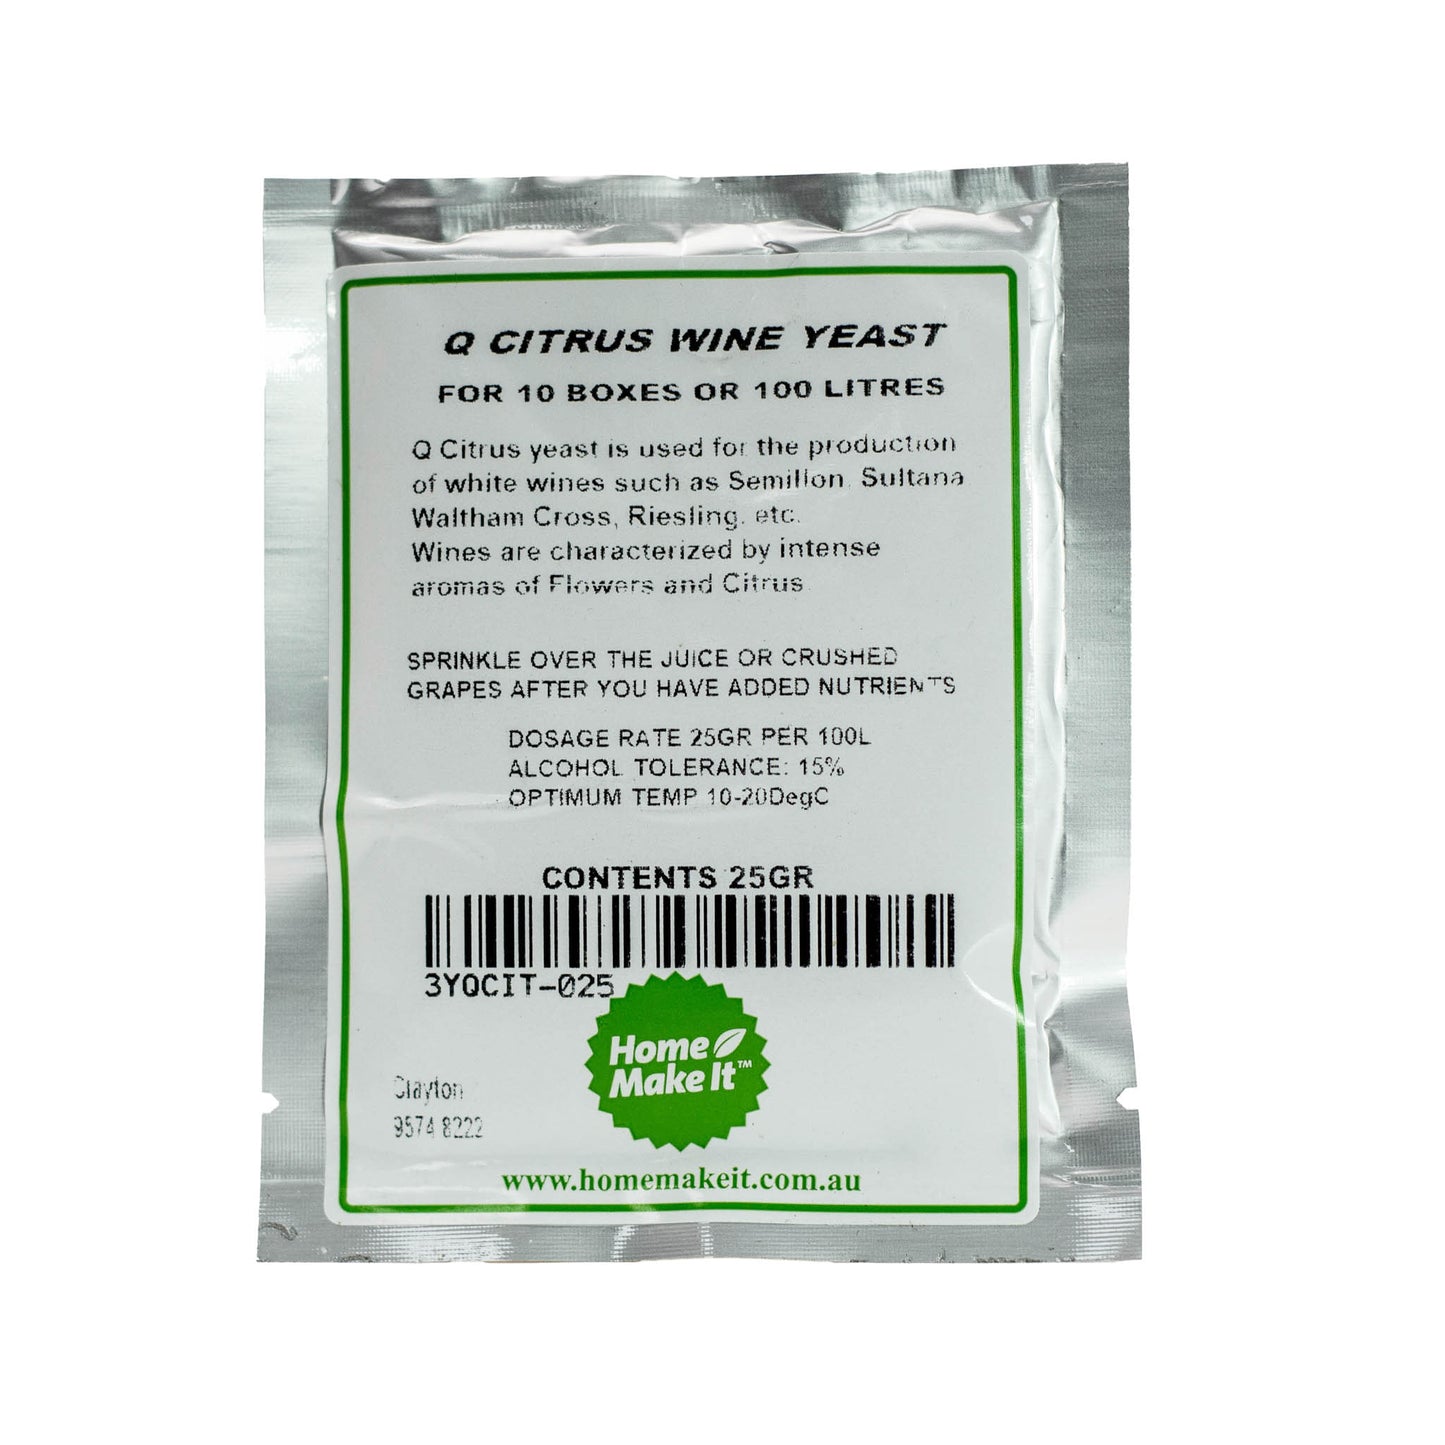 25g packet of Q Citrus wine yeast. for the production of white wines such as Semillon, Sultana, Waltham Cross, Riesling